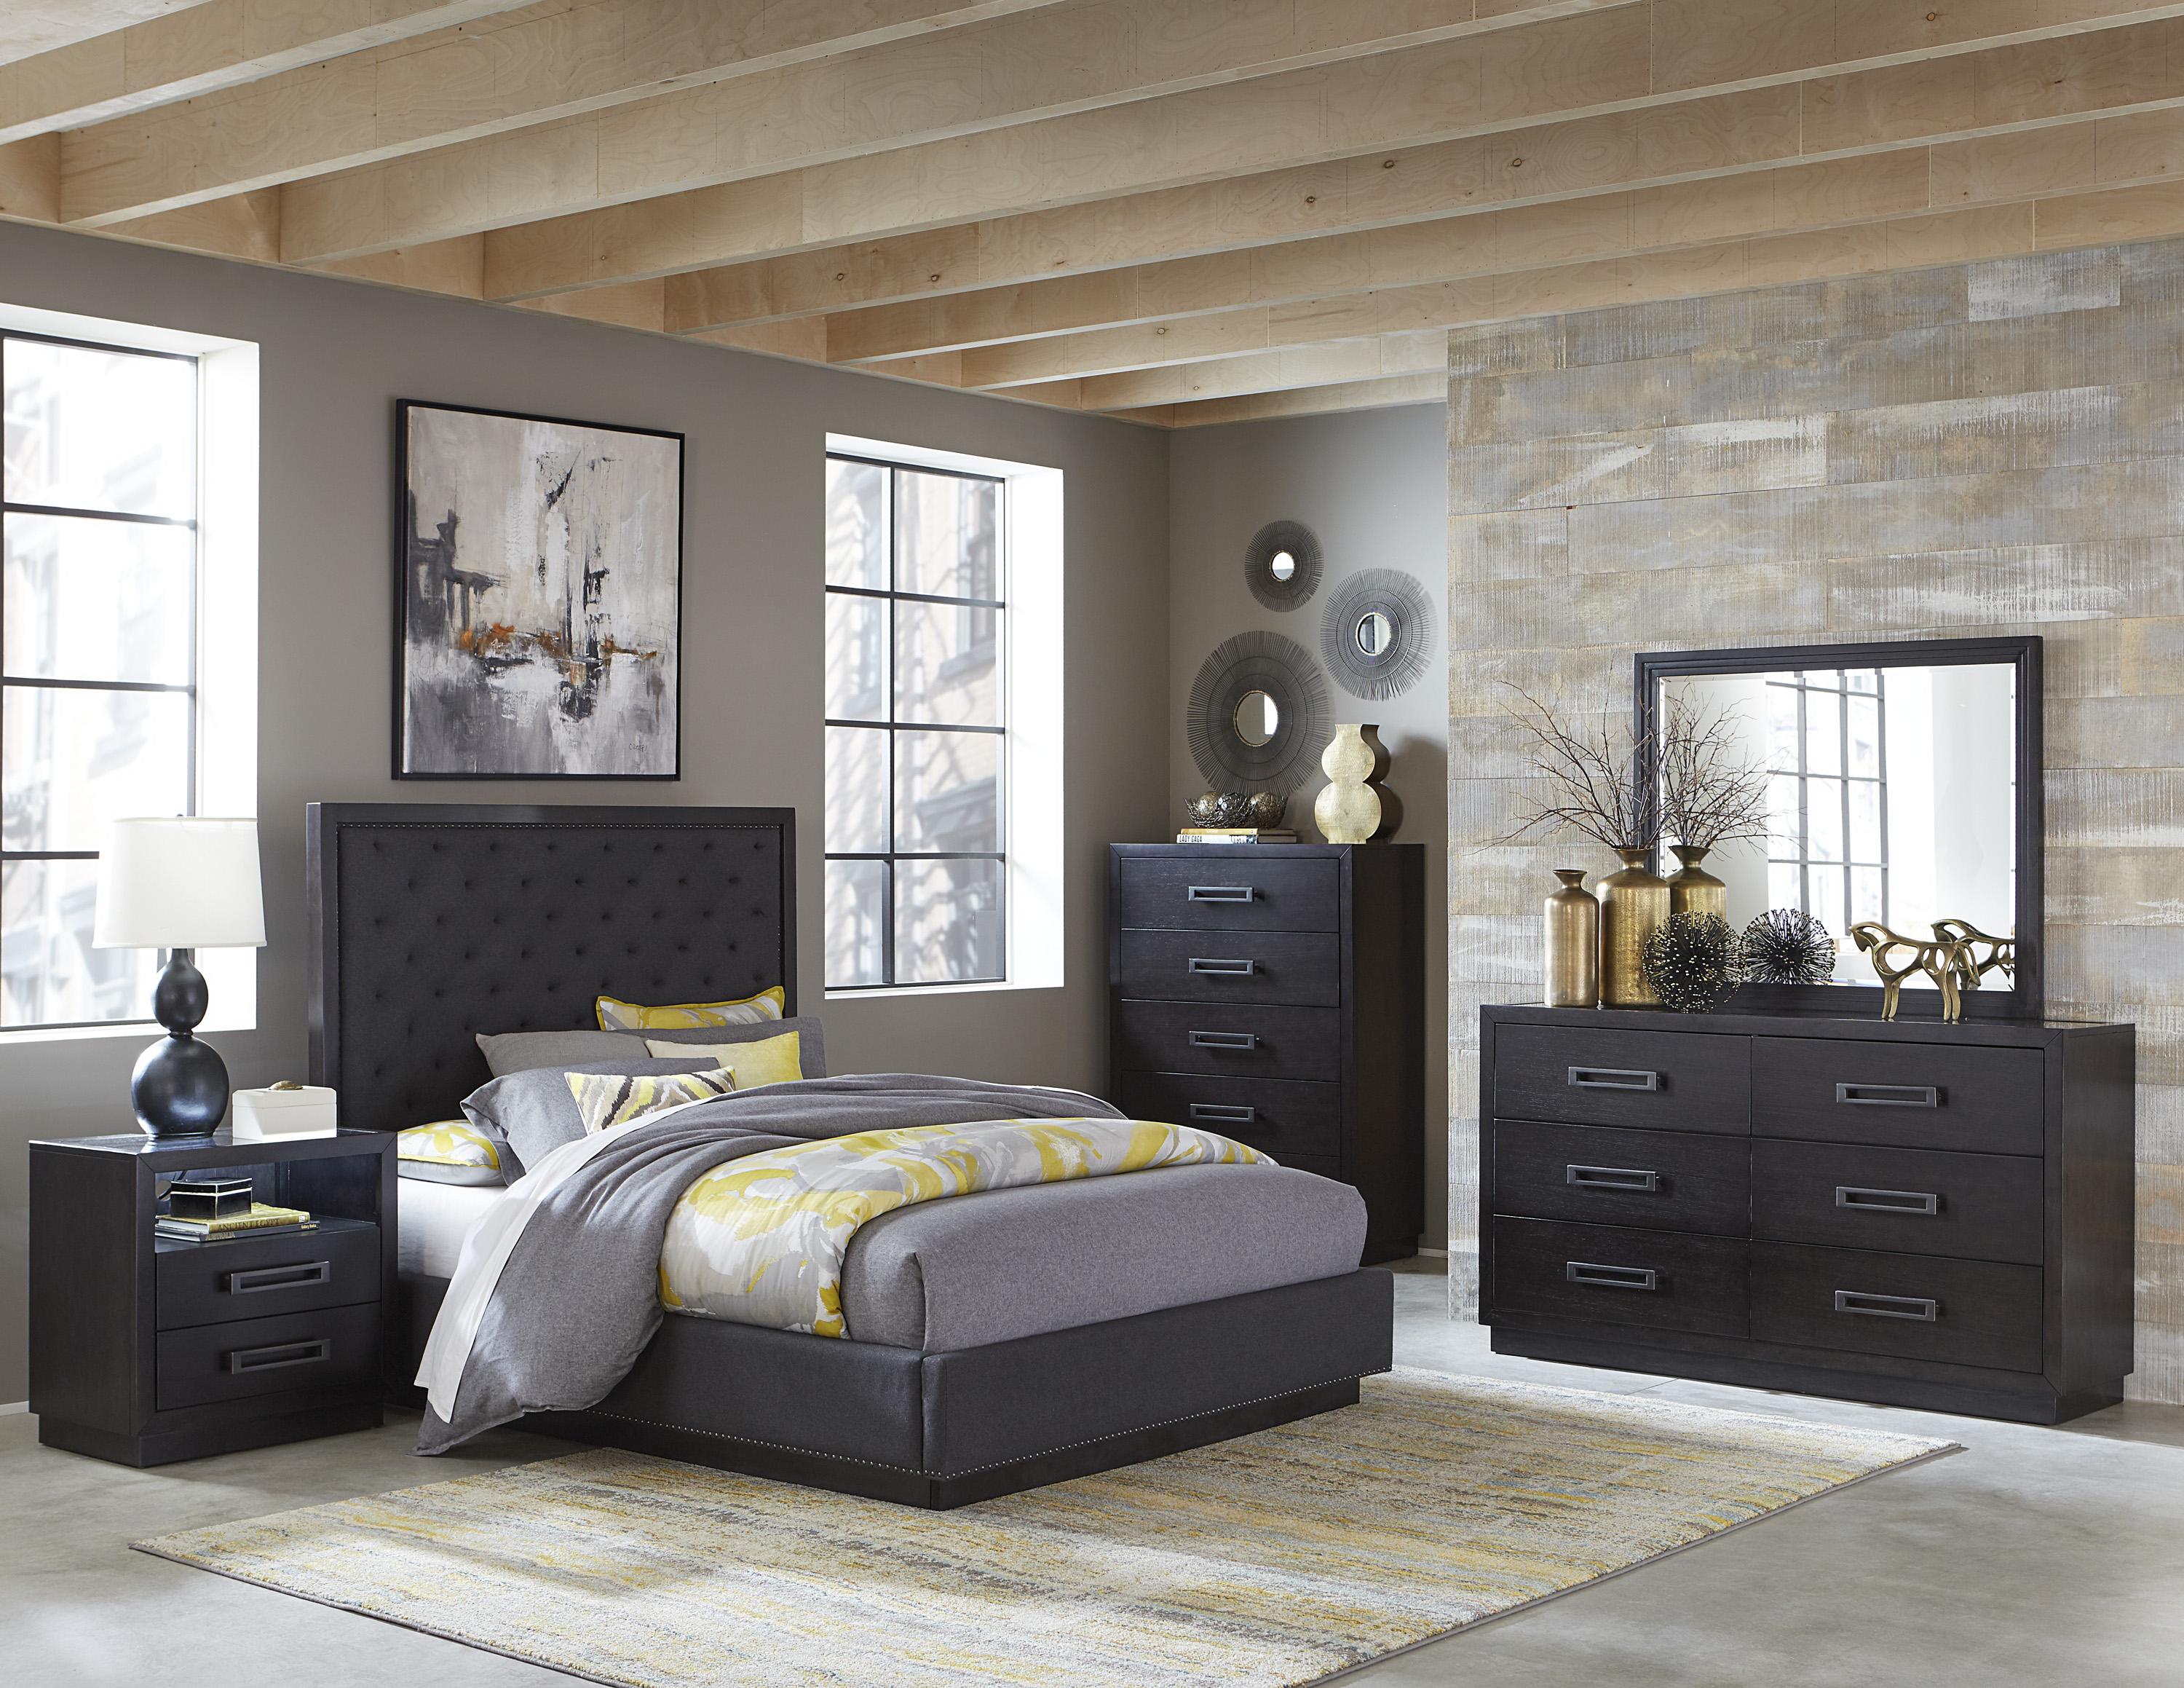 Modern Bedroom Set 5424K-1CK-5PC Larchmont 5424K-1CK-5PC in Charcoal Polyester